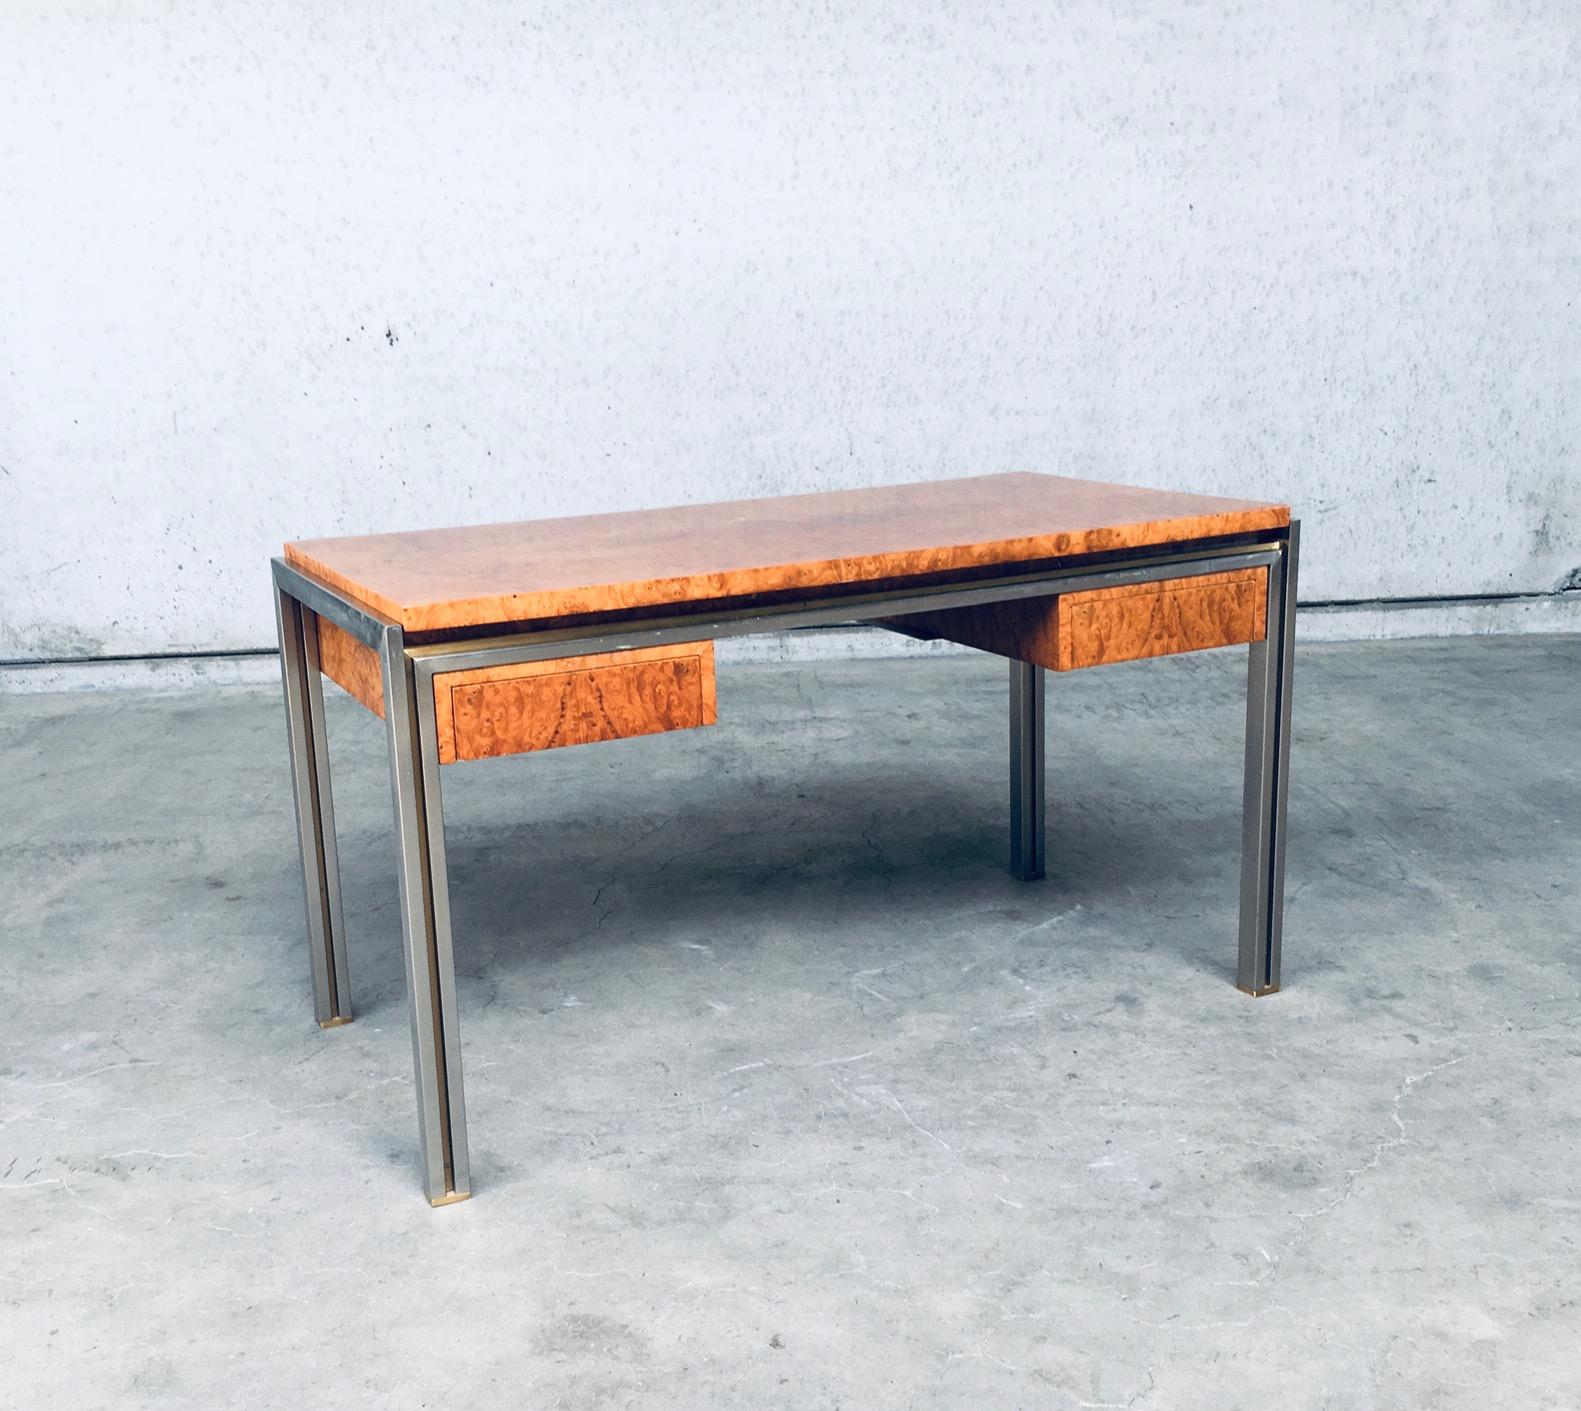 Vintage Postmodern design burl wood desk in the style of Milo Baughman, 1970's / 80's. Made in Italy. Architectural in design. Burl wood top and drawers on brushed metal and brass construction base. 2 very deep drawers, both devided with a utensils